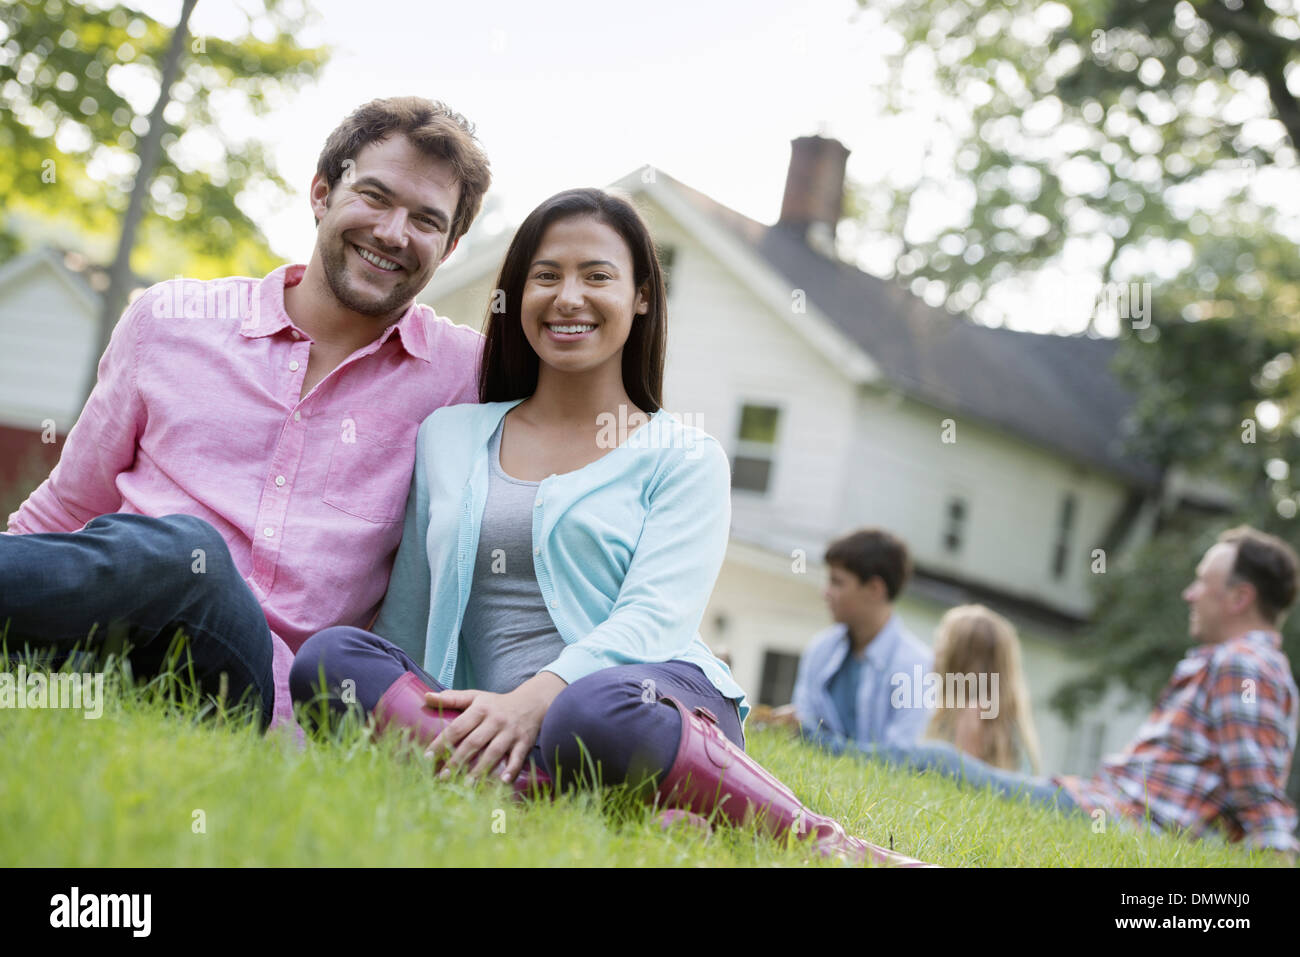 A couple sitting grass at a summer party. Stock Photo